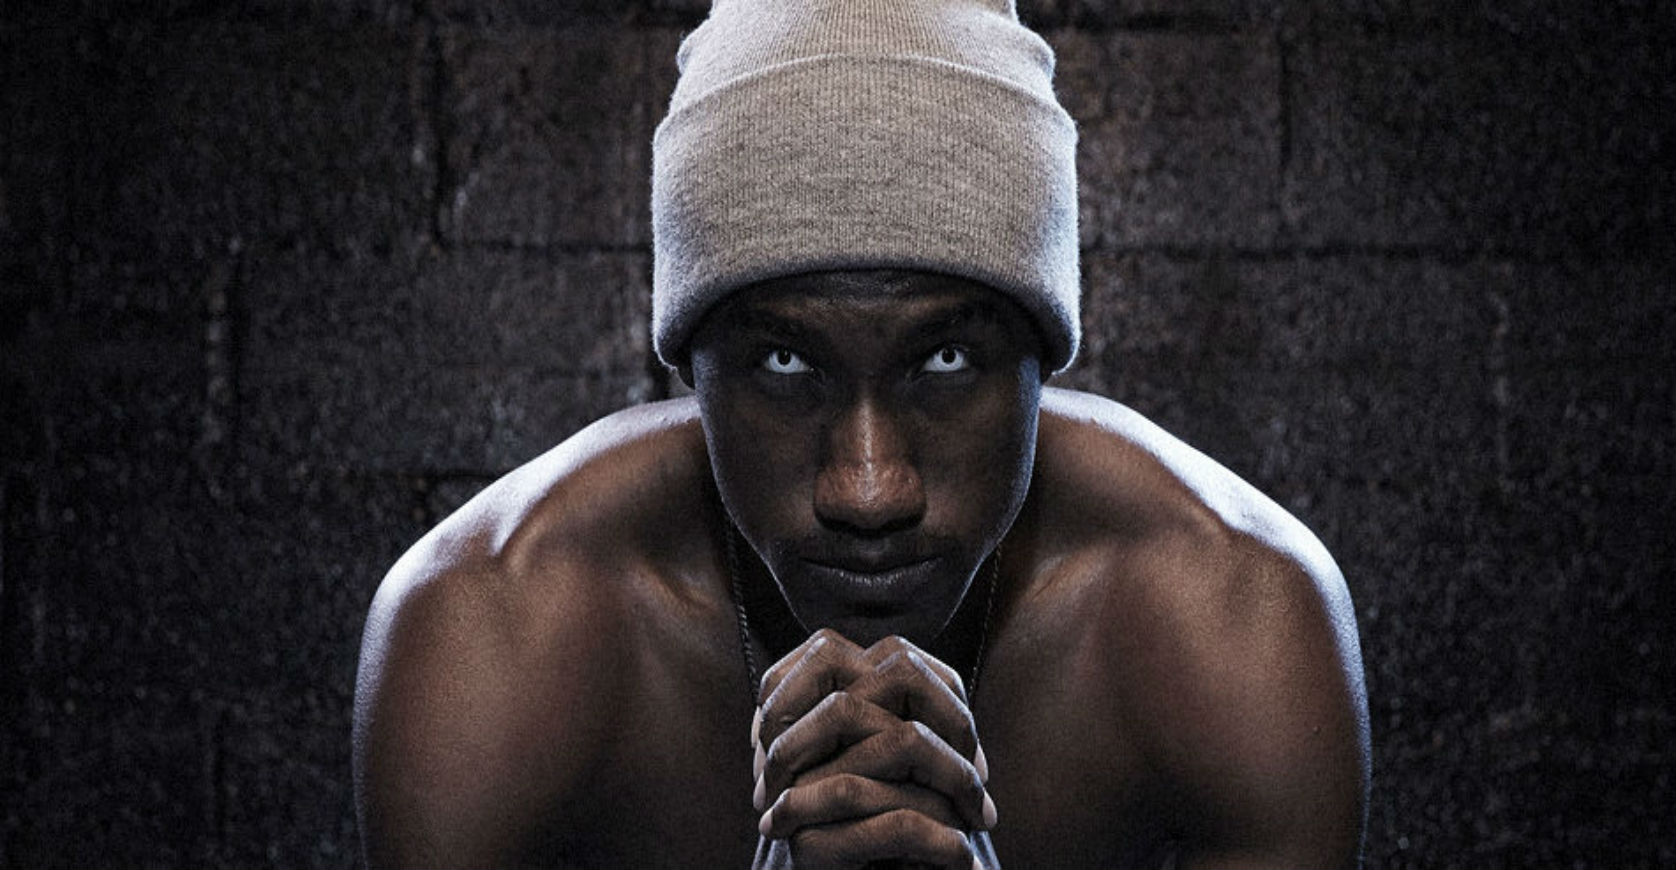 Hopsin’s new album No Shame is now available for streaming and downloading at various digital locations.